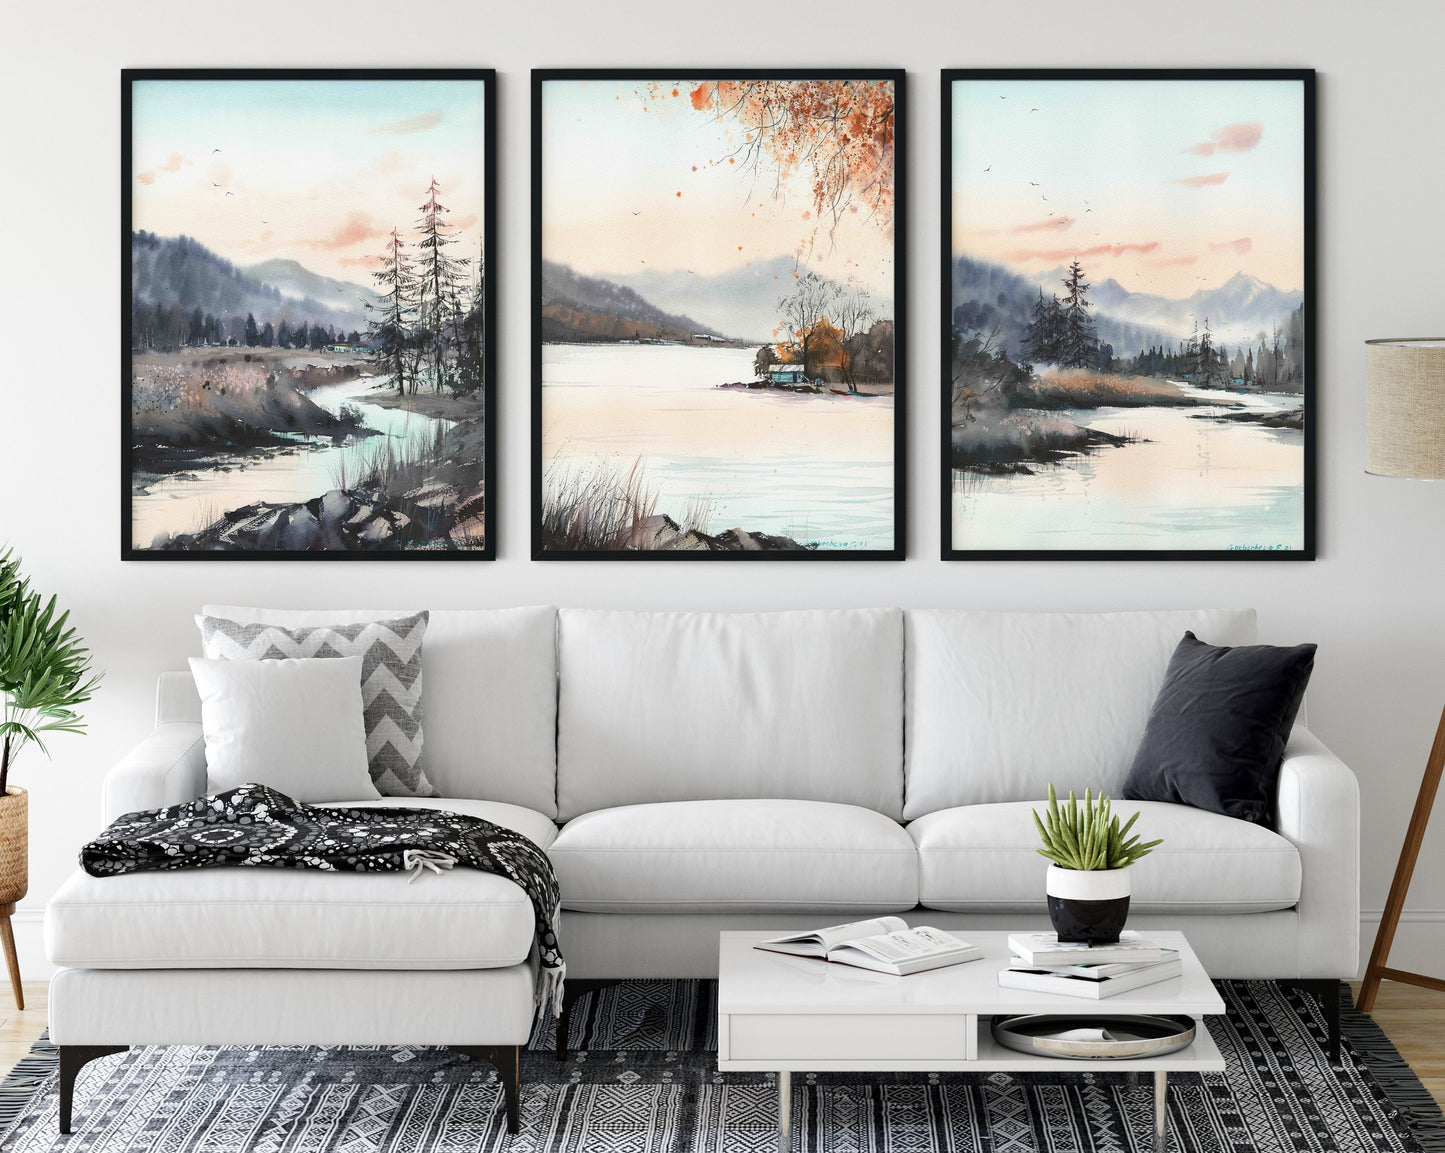 Set of 3 Fall Nature Prints, Abstract Mountain Art, Turquoise Lake House, Landscape Canvas Paintings, Decor Above Bed